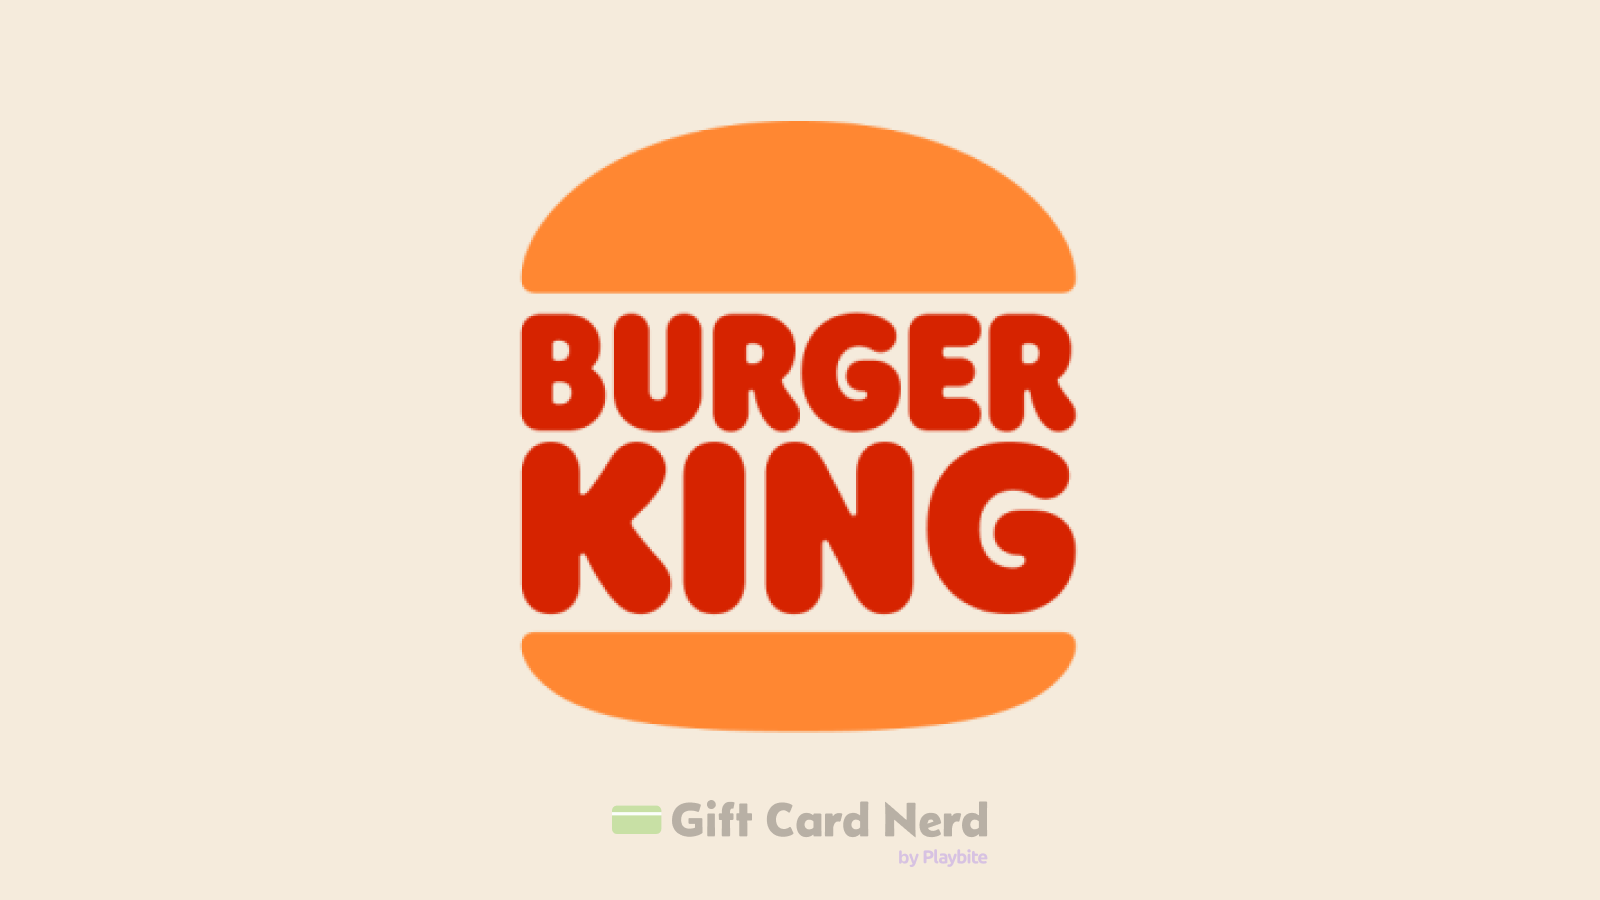 Does GameStop Sell Burger King Gift Cards?